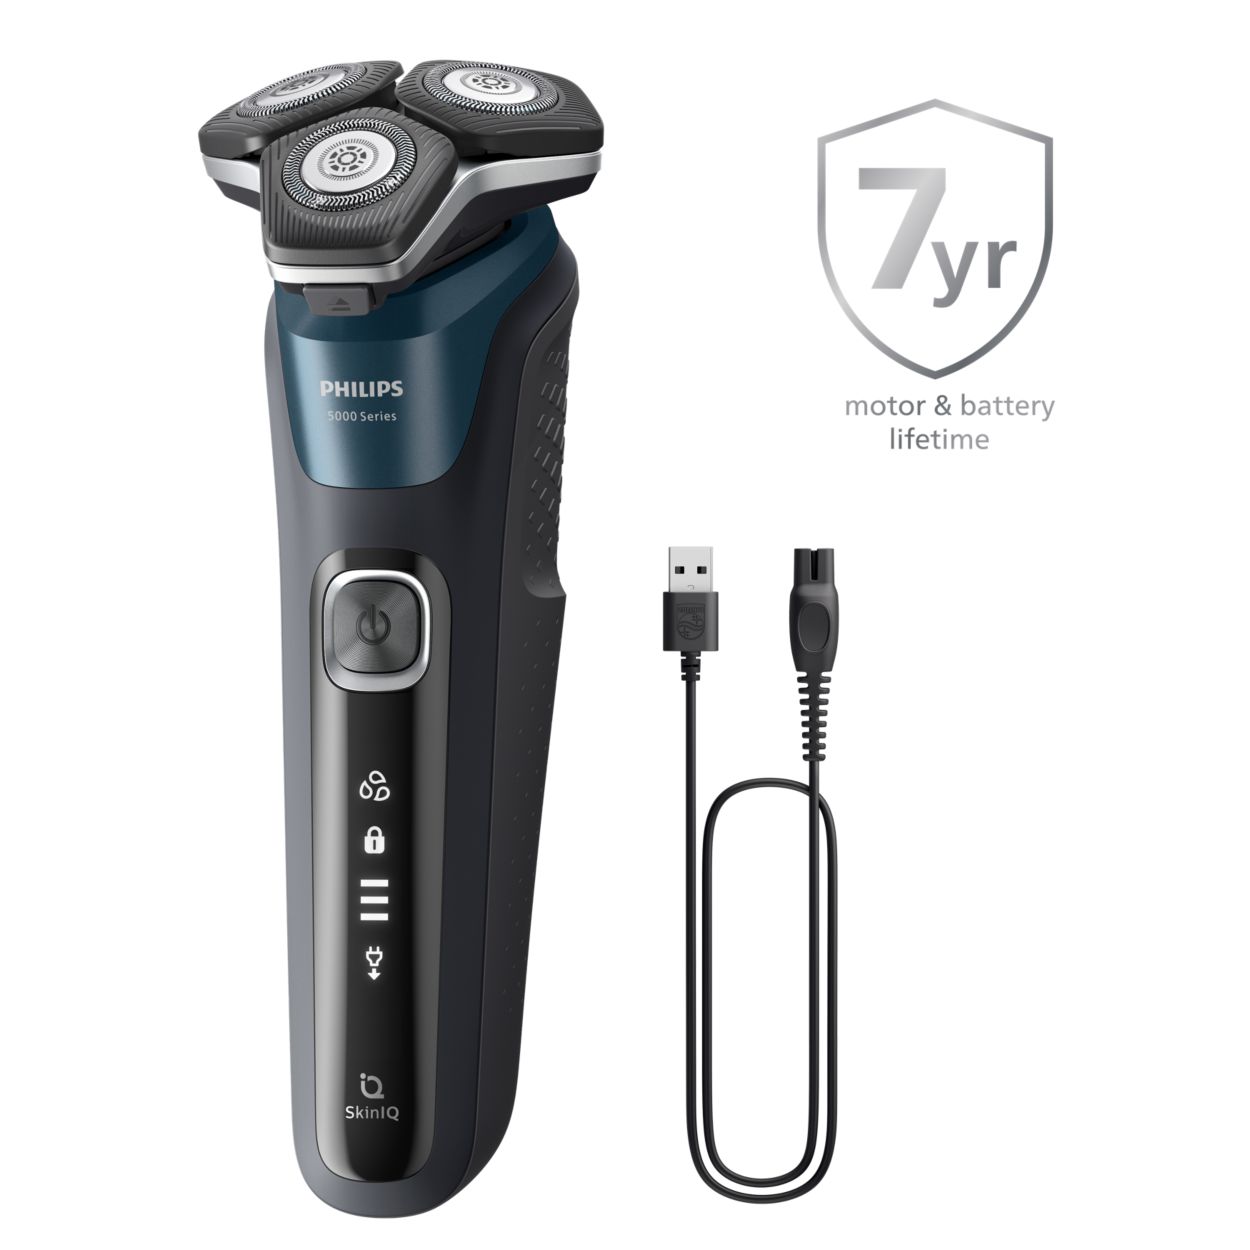 Shaver Series 5000 Wet & Dry electric shaver S5889/60 | Philips